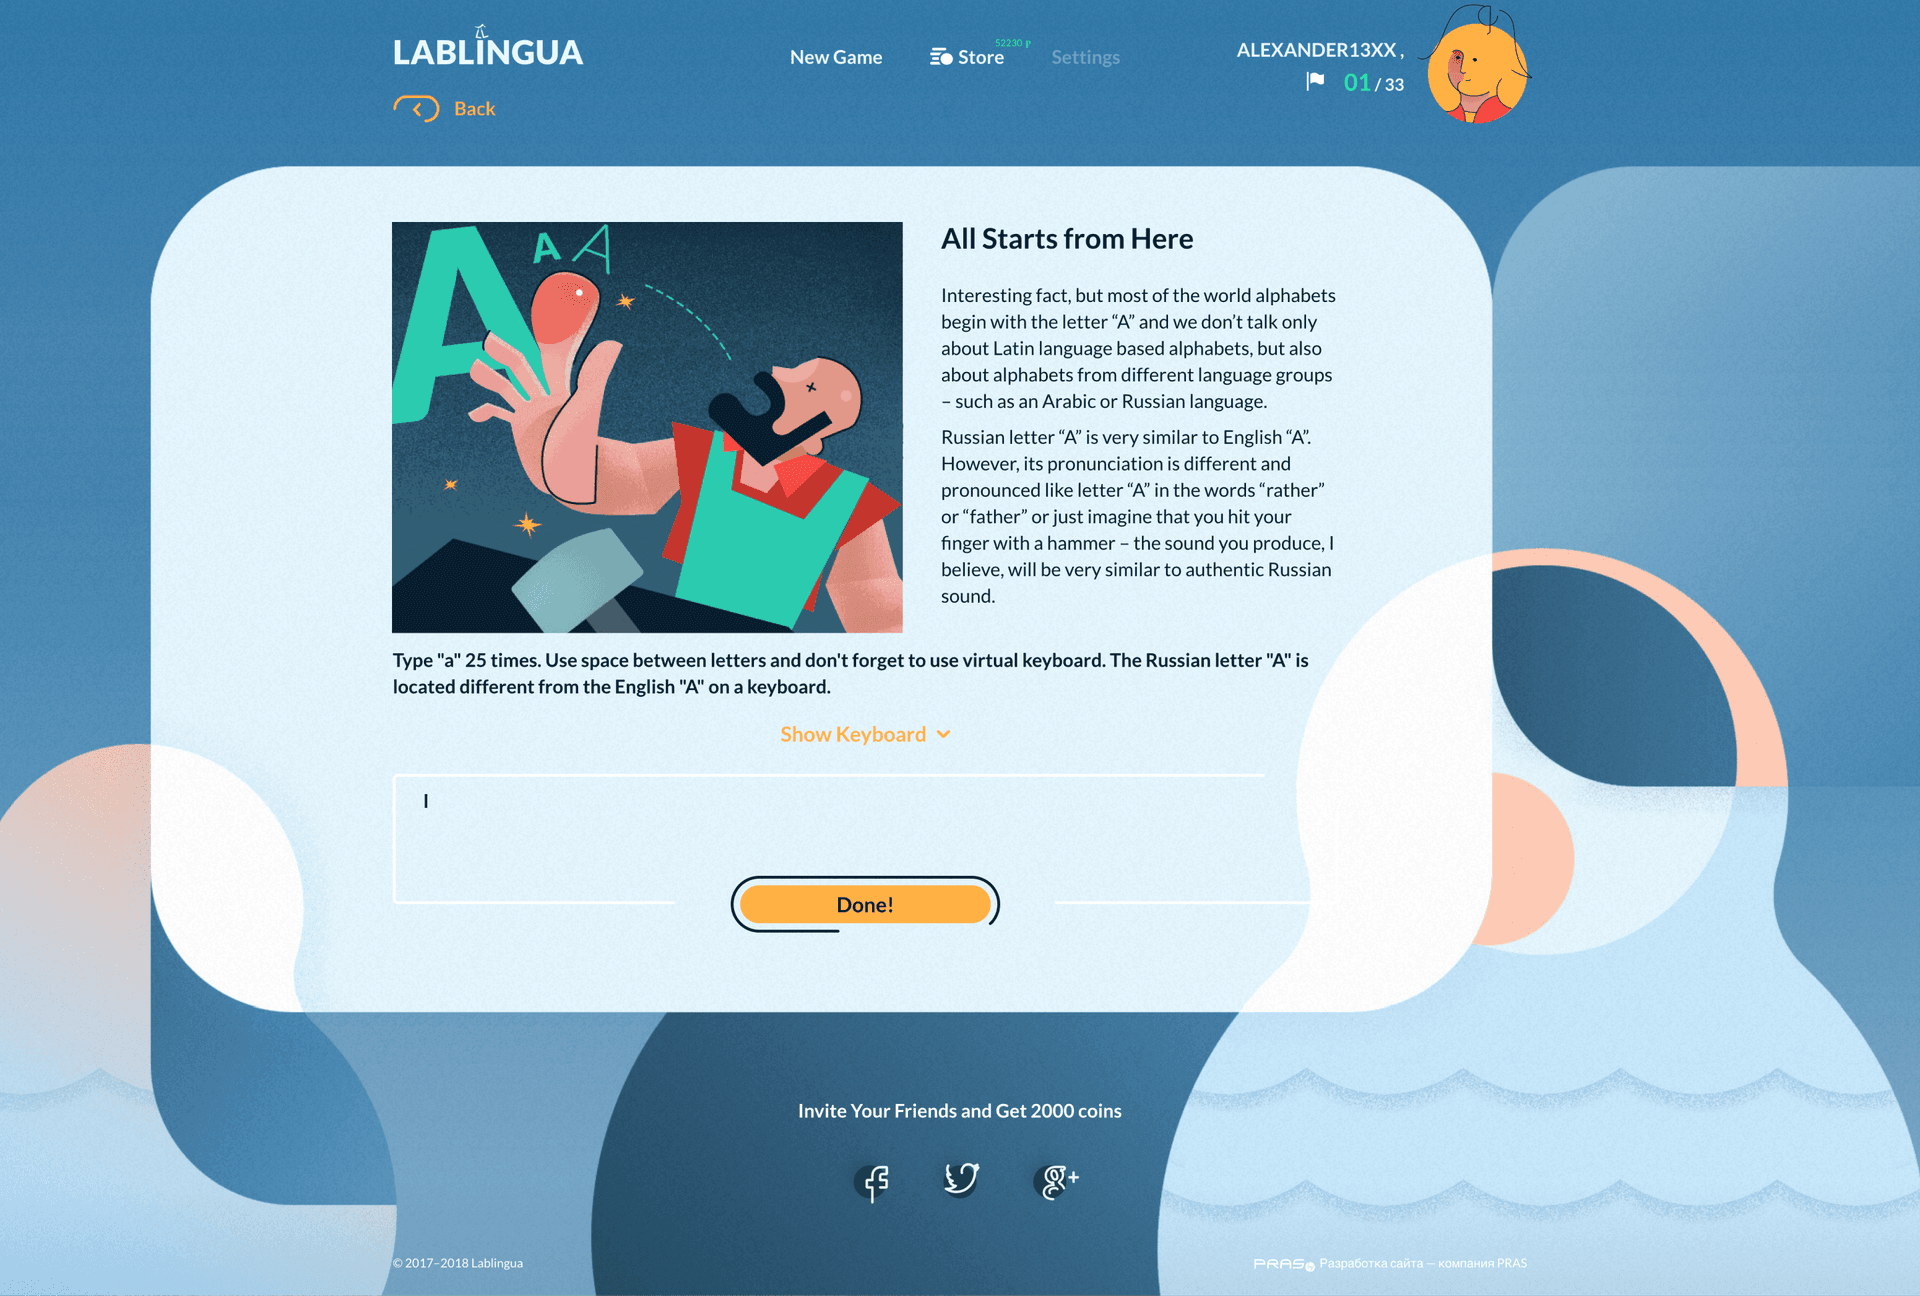 Main page of the project